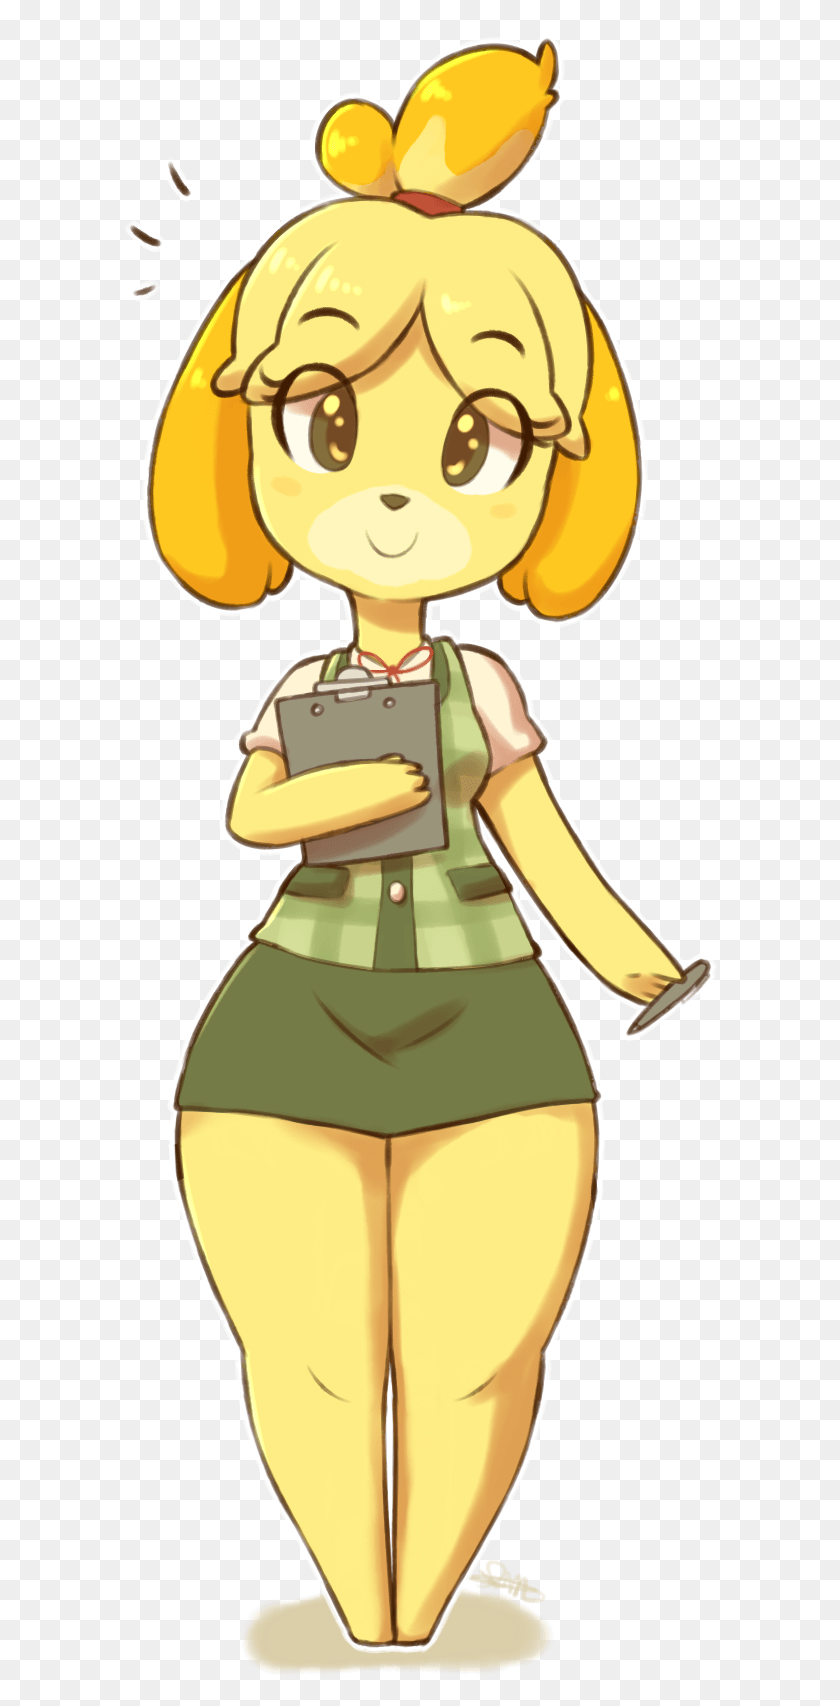 596x1646 Descargar Png Isabelle By Spikedmauler Db5Yilw Tom Nook Animal Crossing Human, Person, Outdoors, Clothing Hd Png